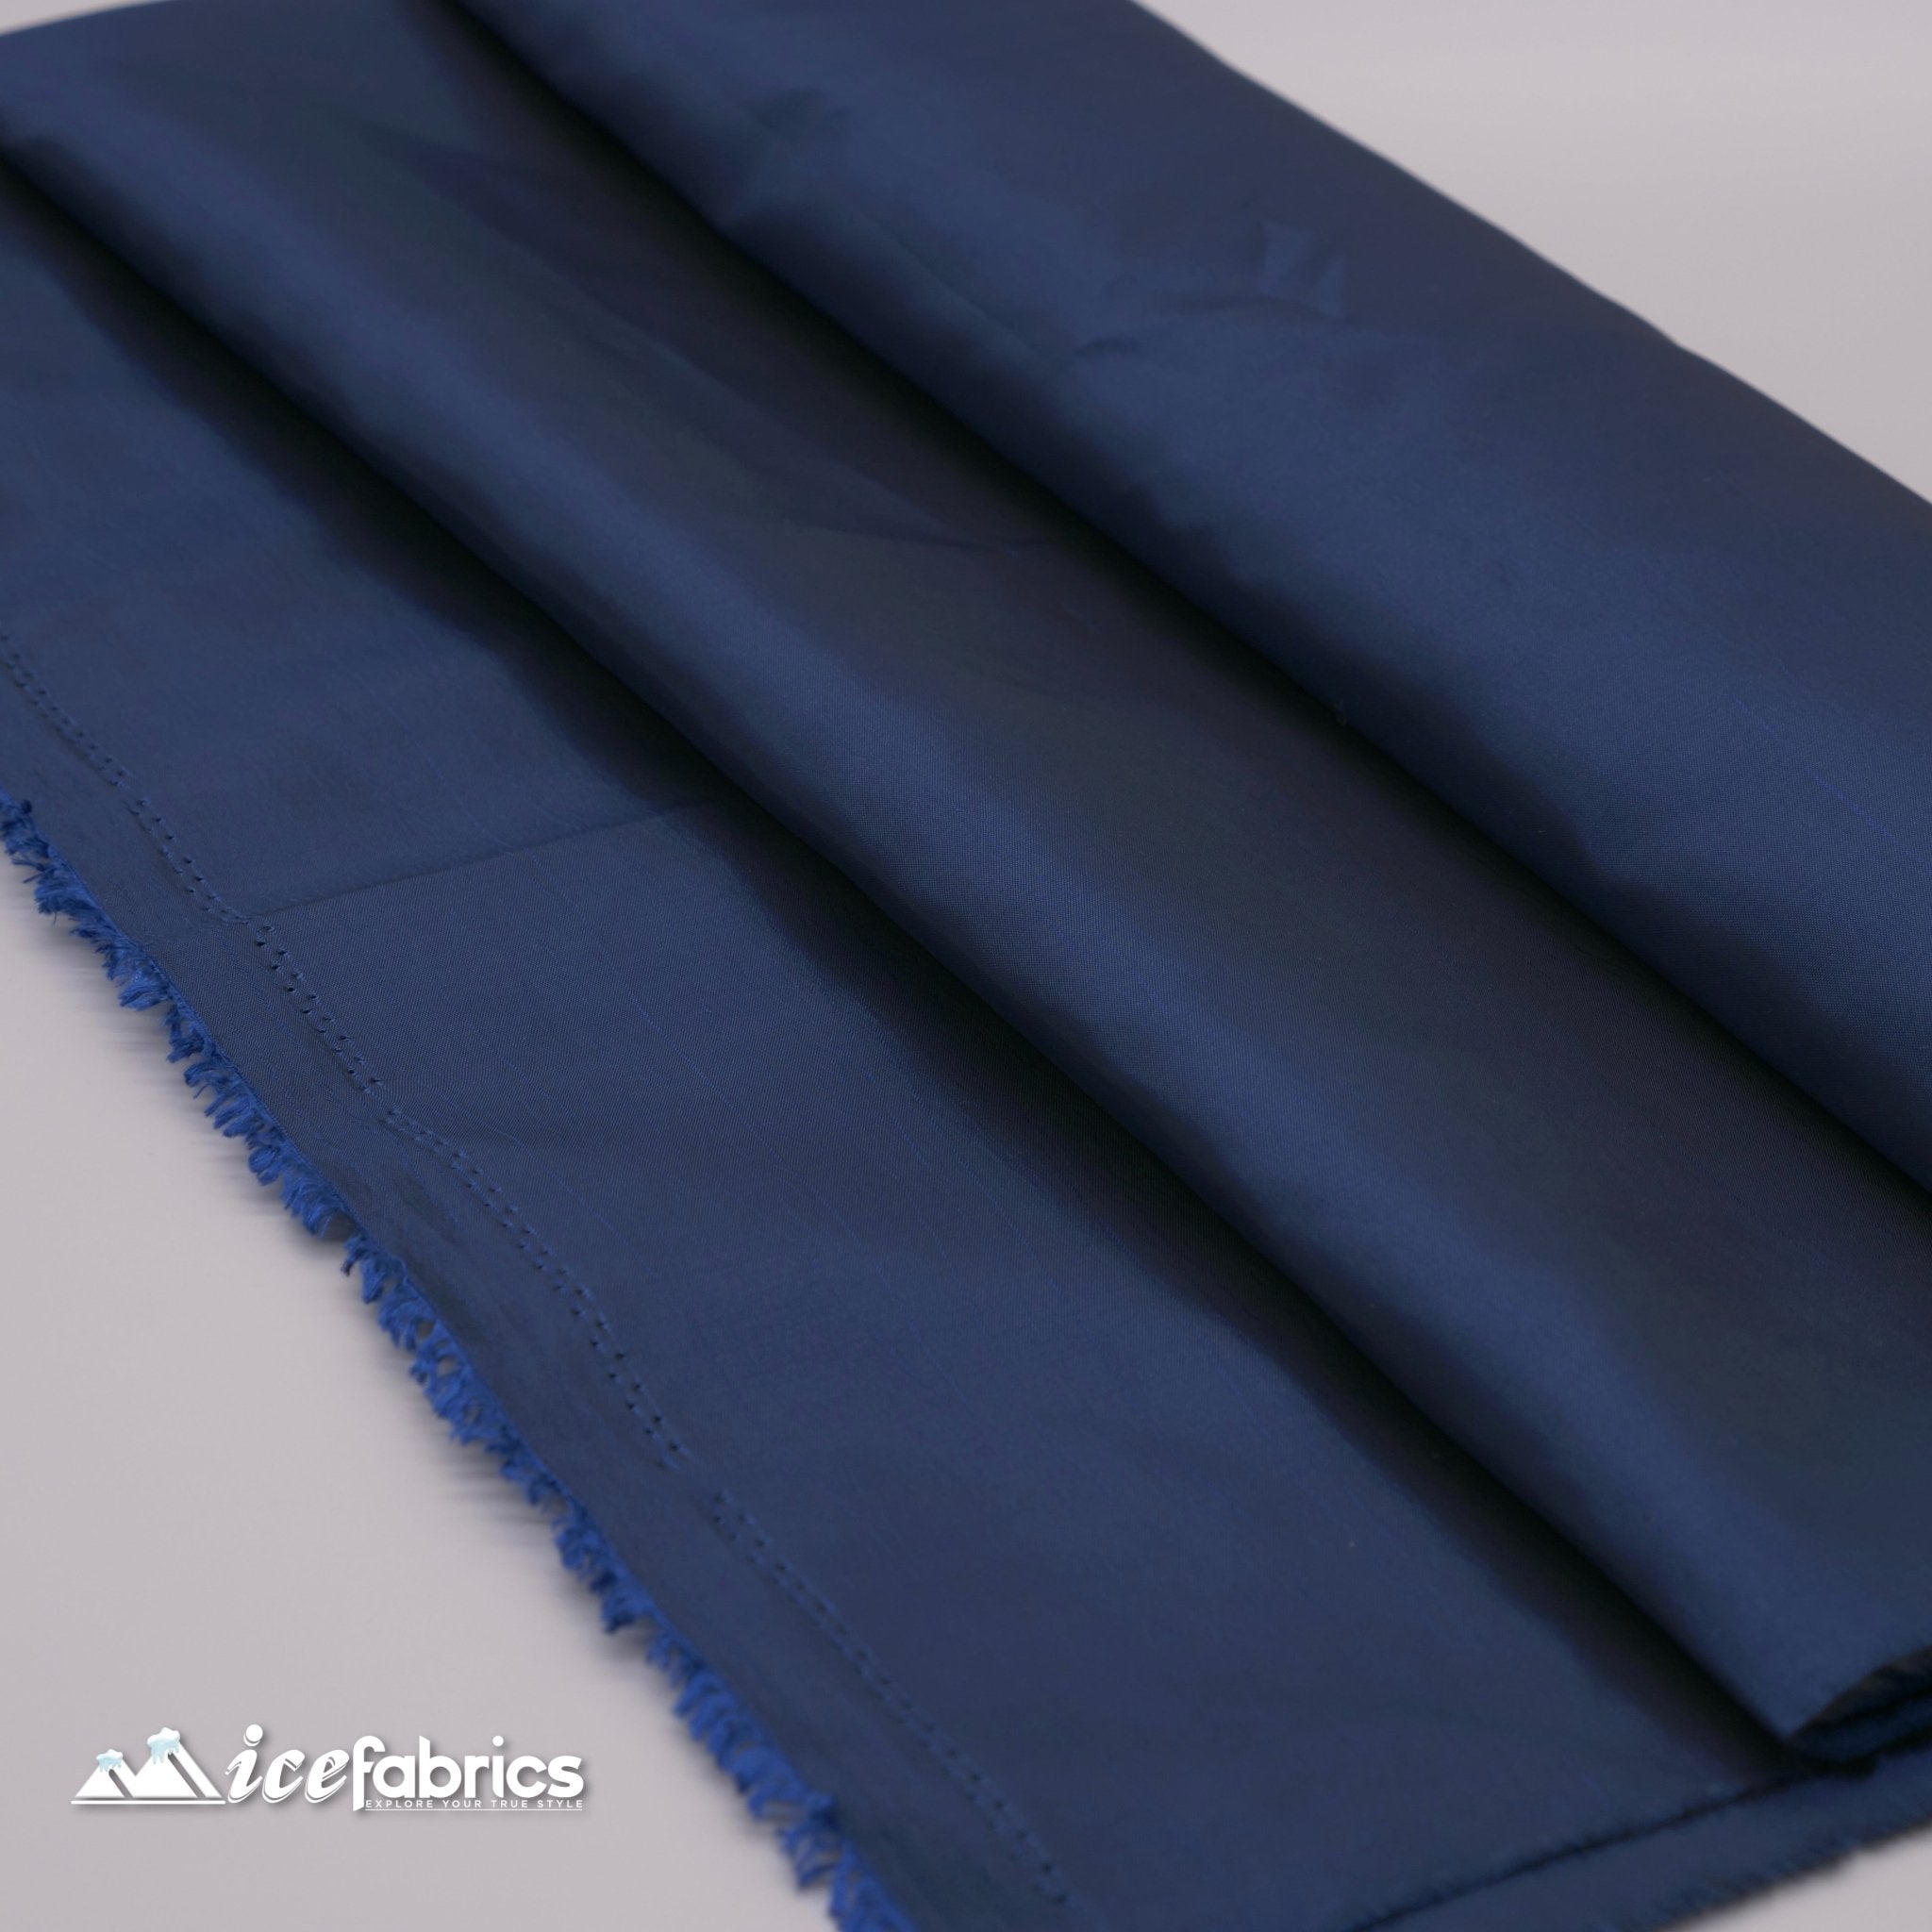 High Quality Solid Taffeta Fabric_ 60" Width_ By The YardTaffeta FabricICEFABRICICE FABRICSNavy blueHigh Quality Solid Taffeta Fabric_ 60" Width_ By The Yard ICEFABRIC Navy blue